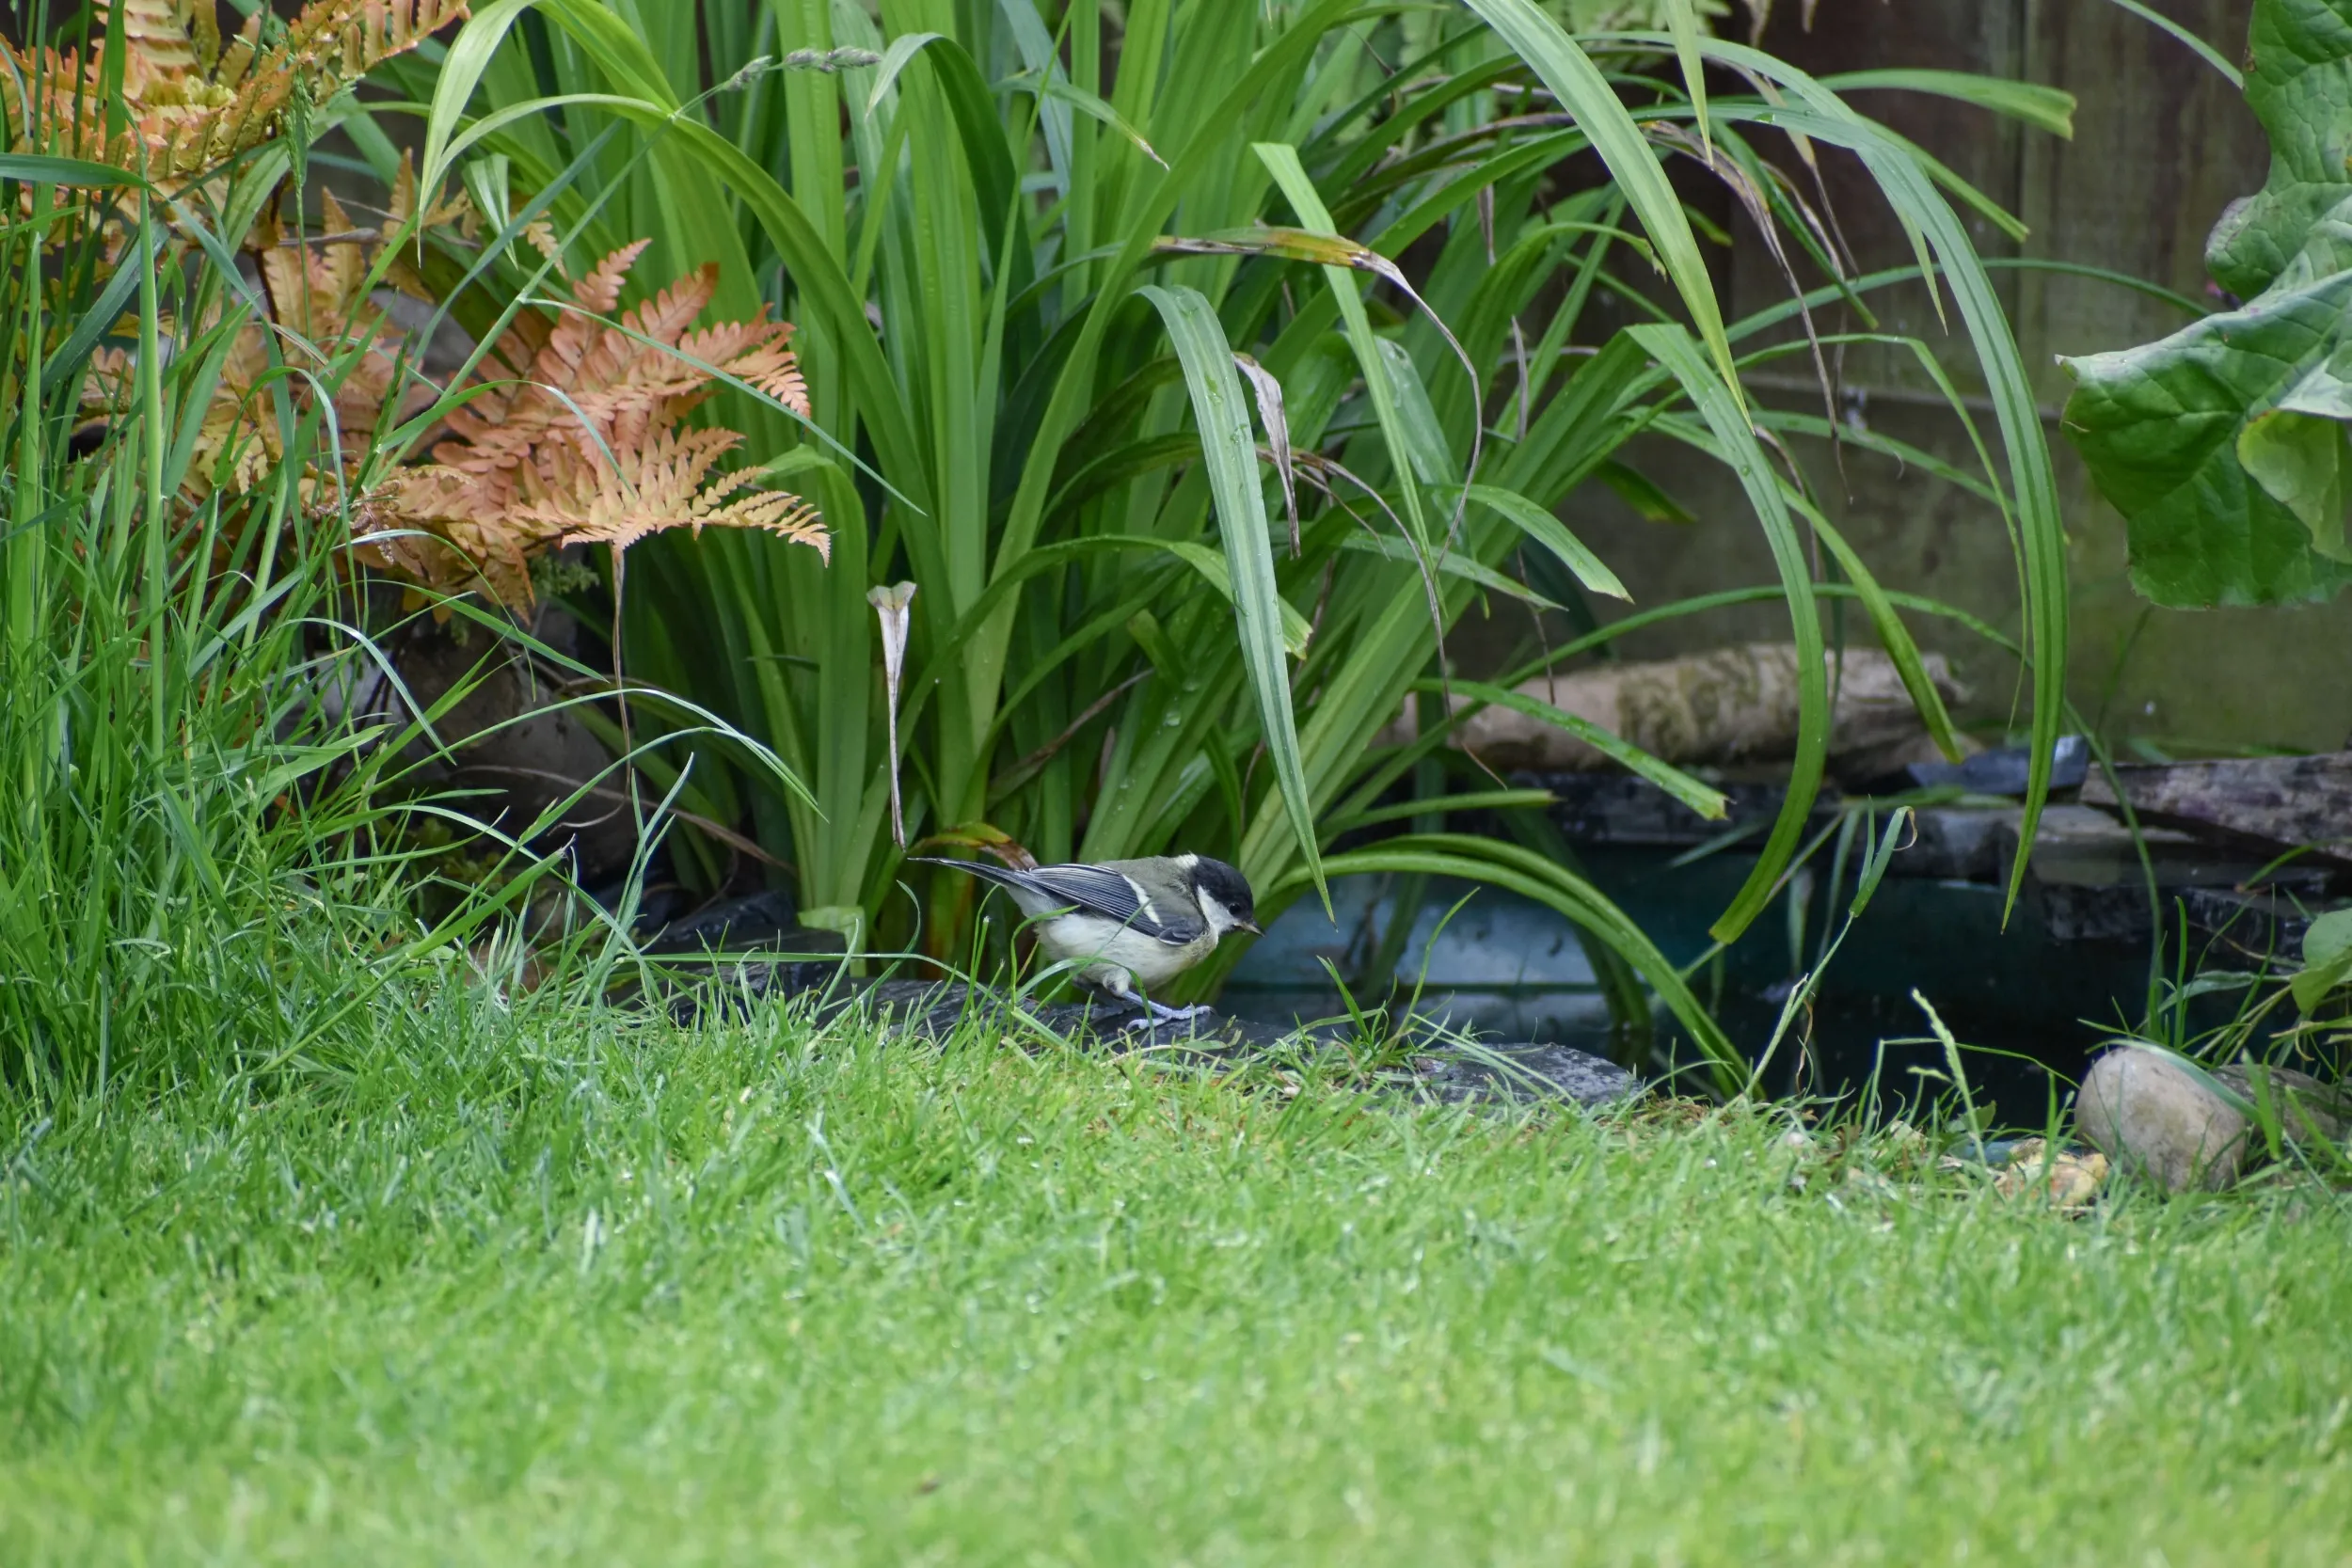 Great Tit fledging perched on the grass next to a small wildlife pond.